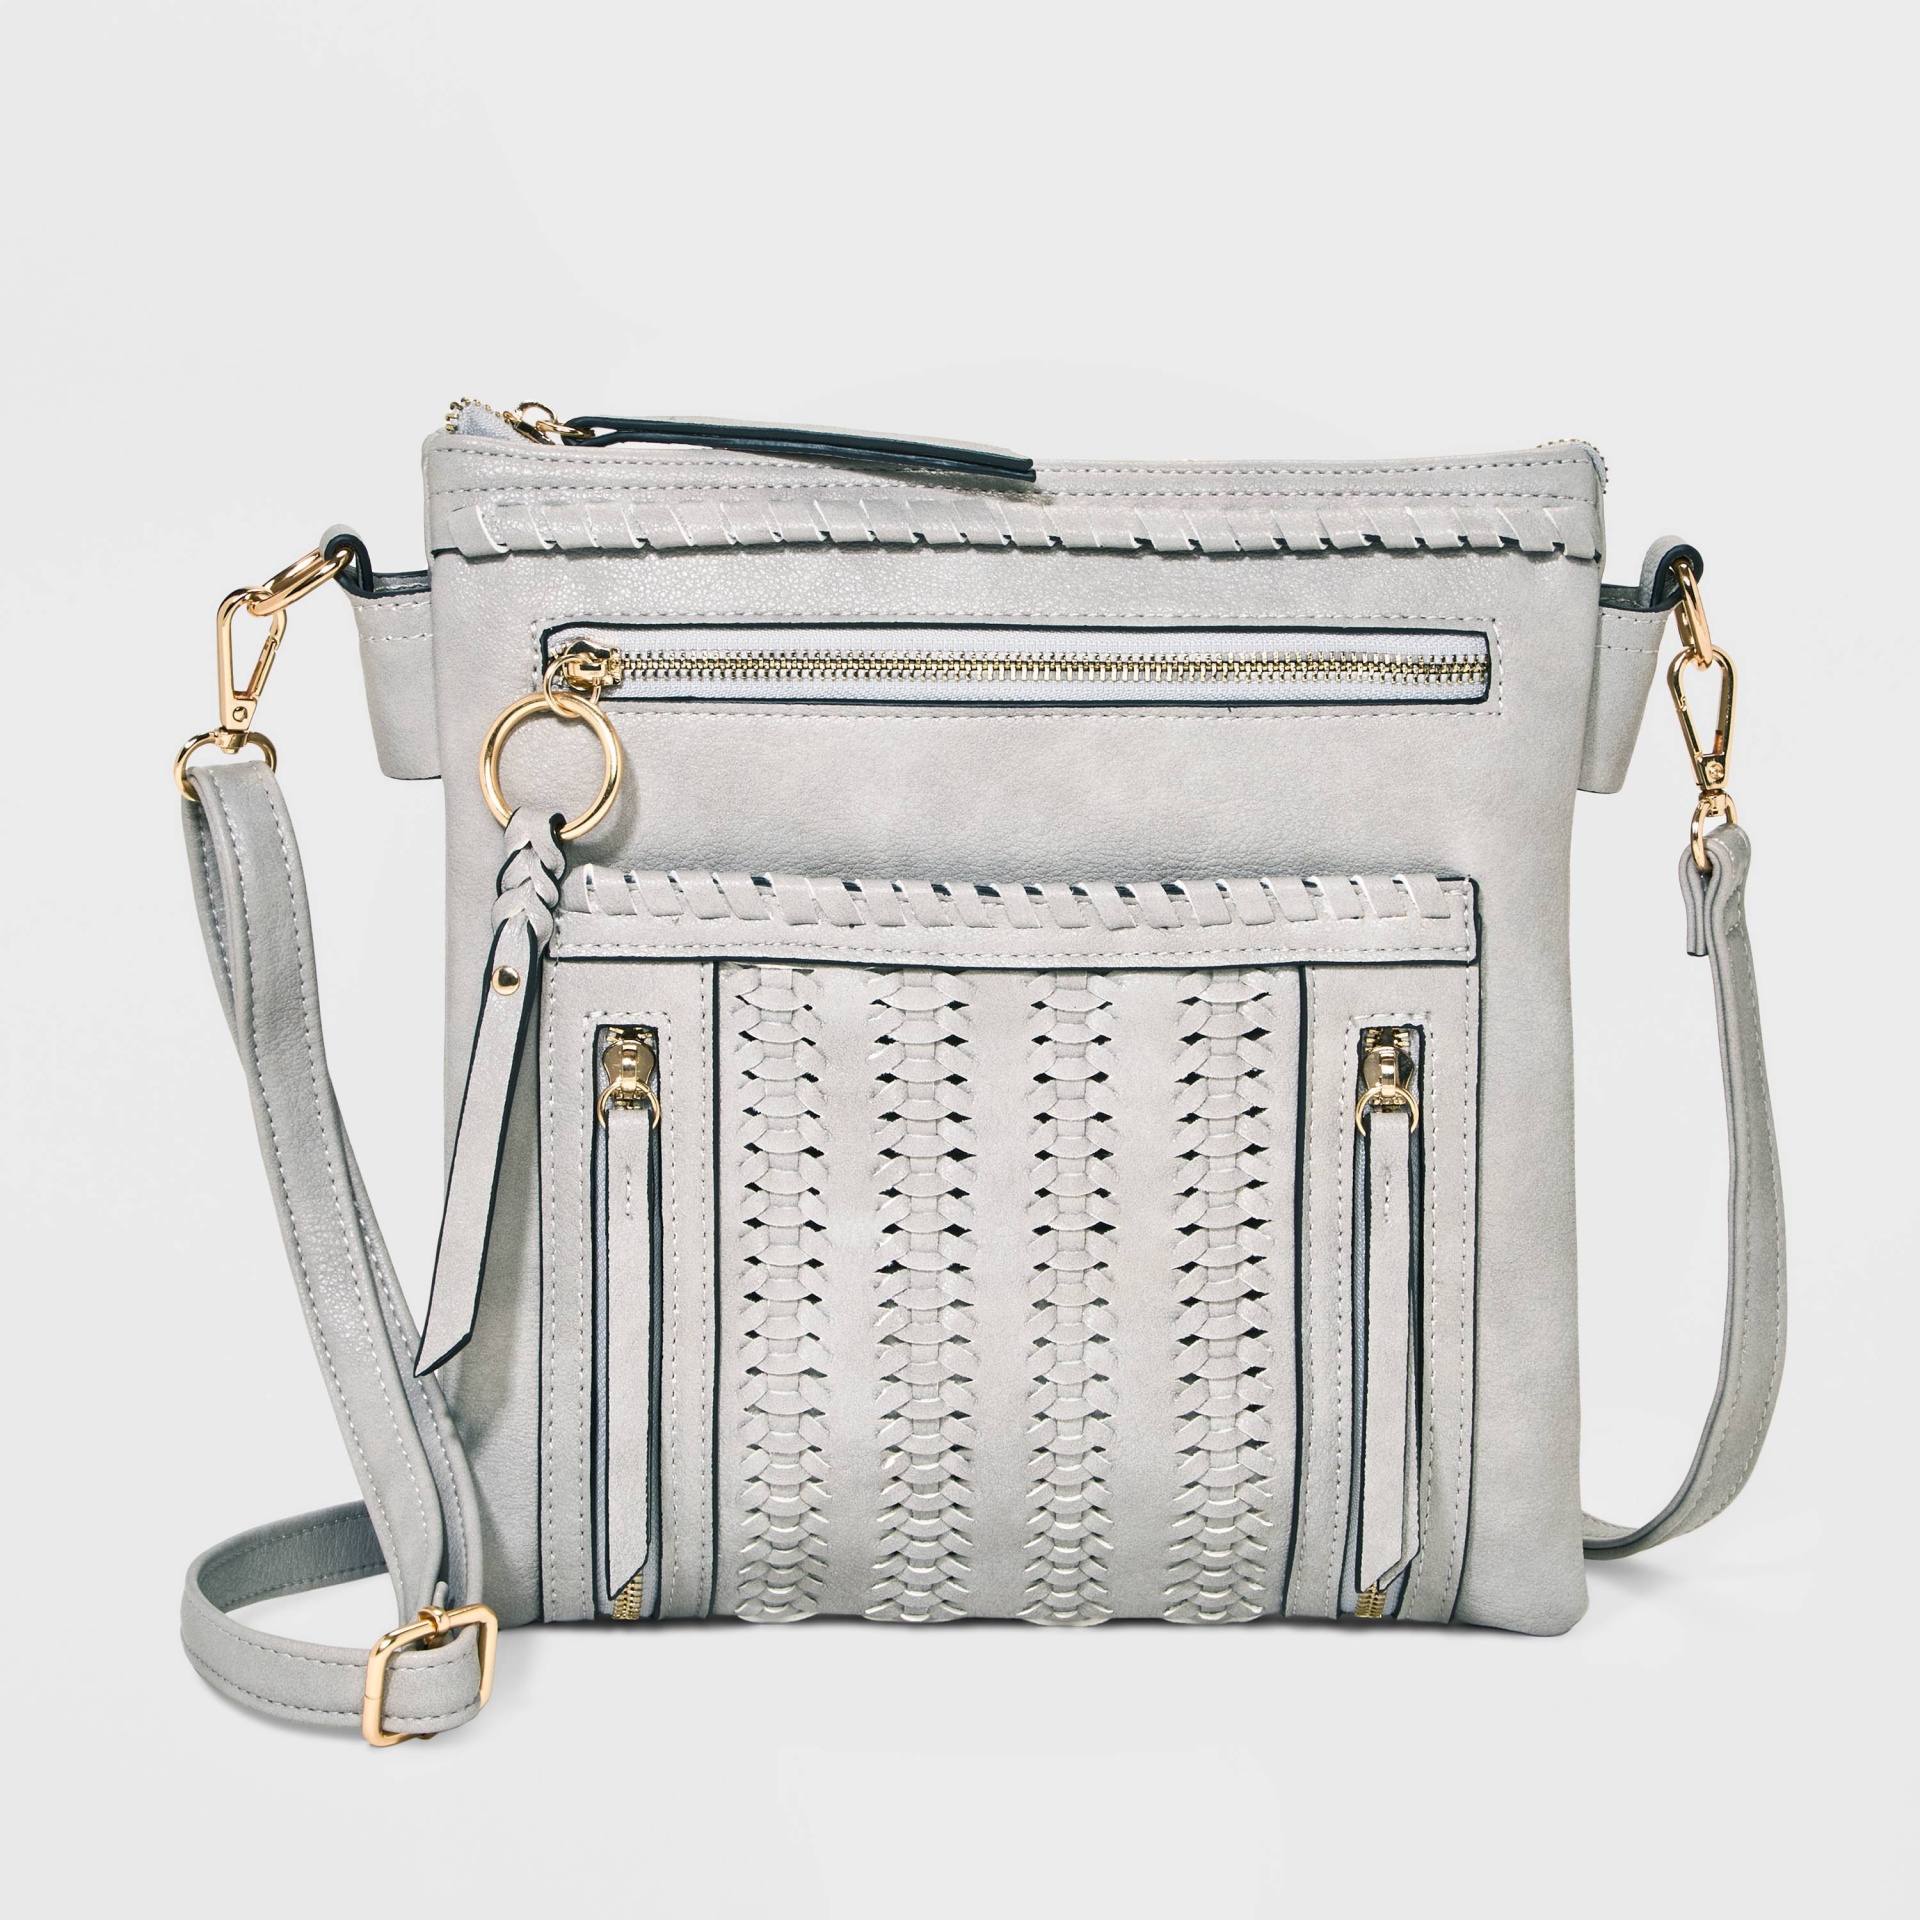 VR NYC Woven Front Pocket Double Compartment Crossbody Bag - Light Gray 1  ct